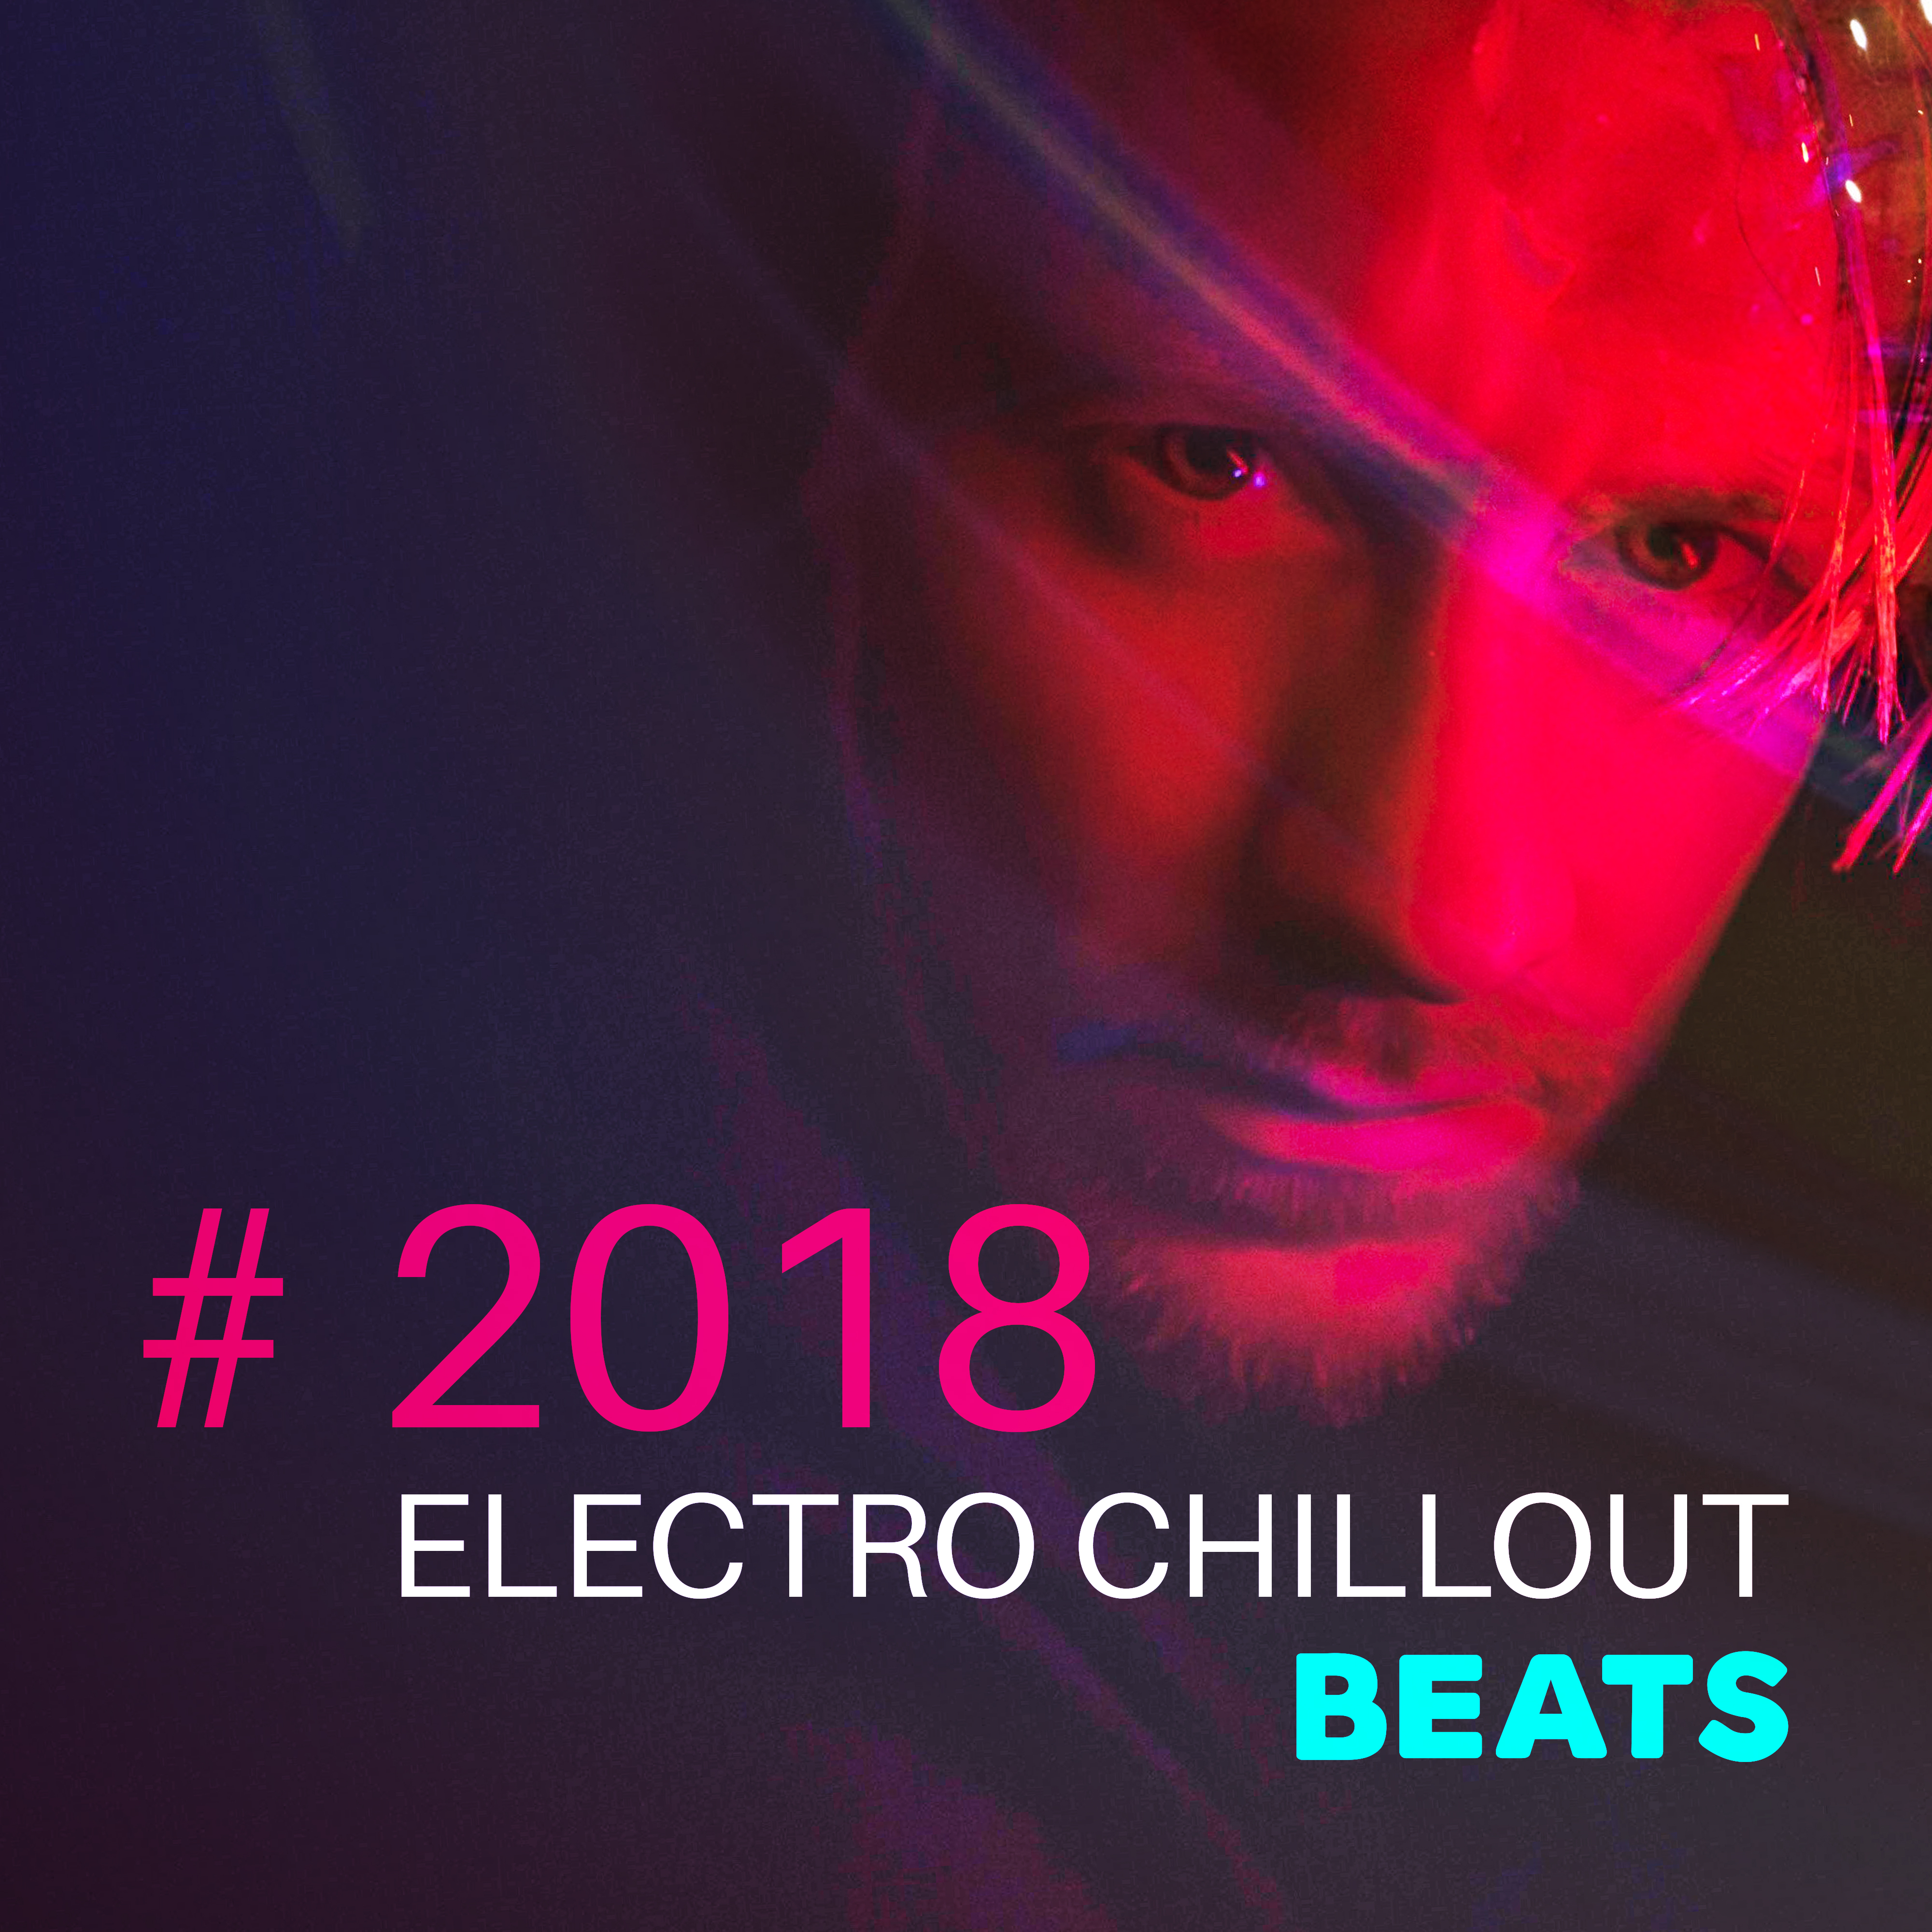 # 2018 Electro Chillout Beats